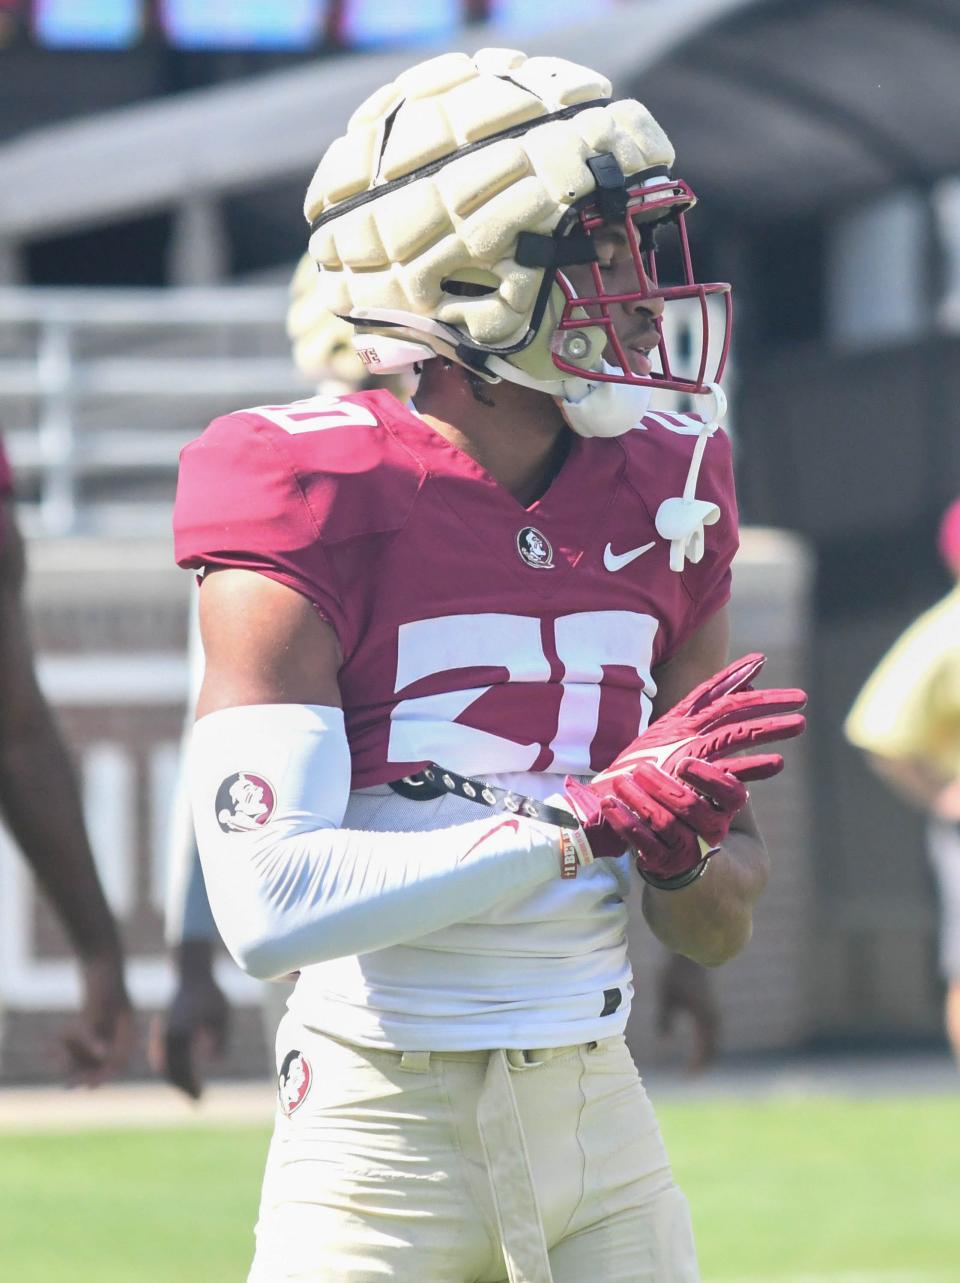 Florida State football players take part in drills during an FSU spring football practice of the 2023 season on Thursday, April 6, 2023 in Doak Campbell Stadium.